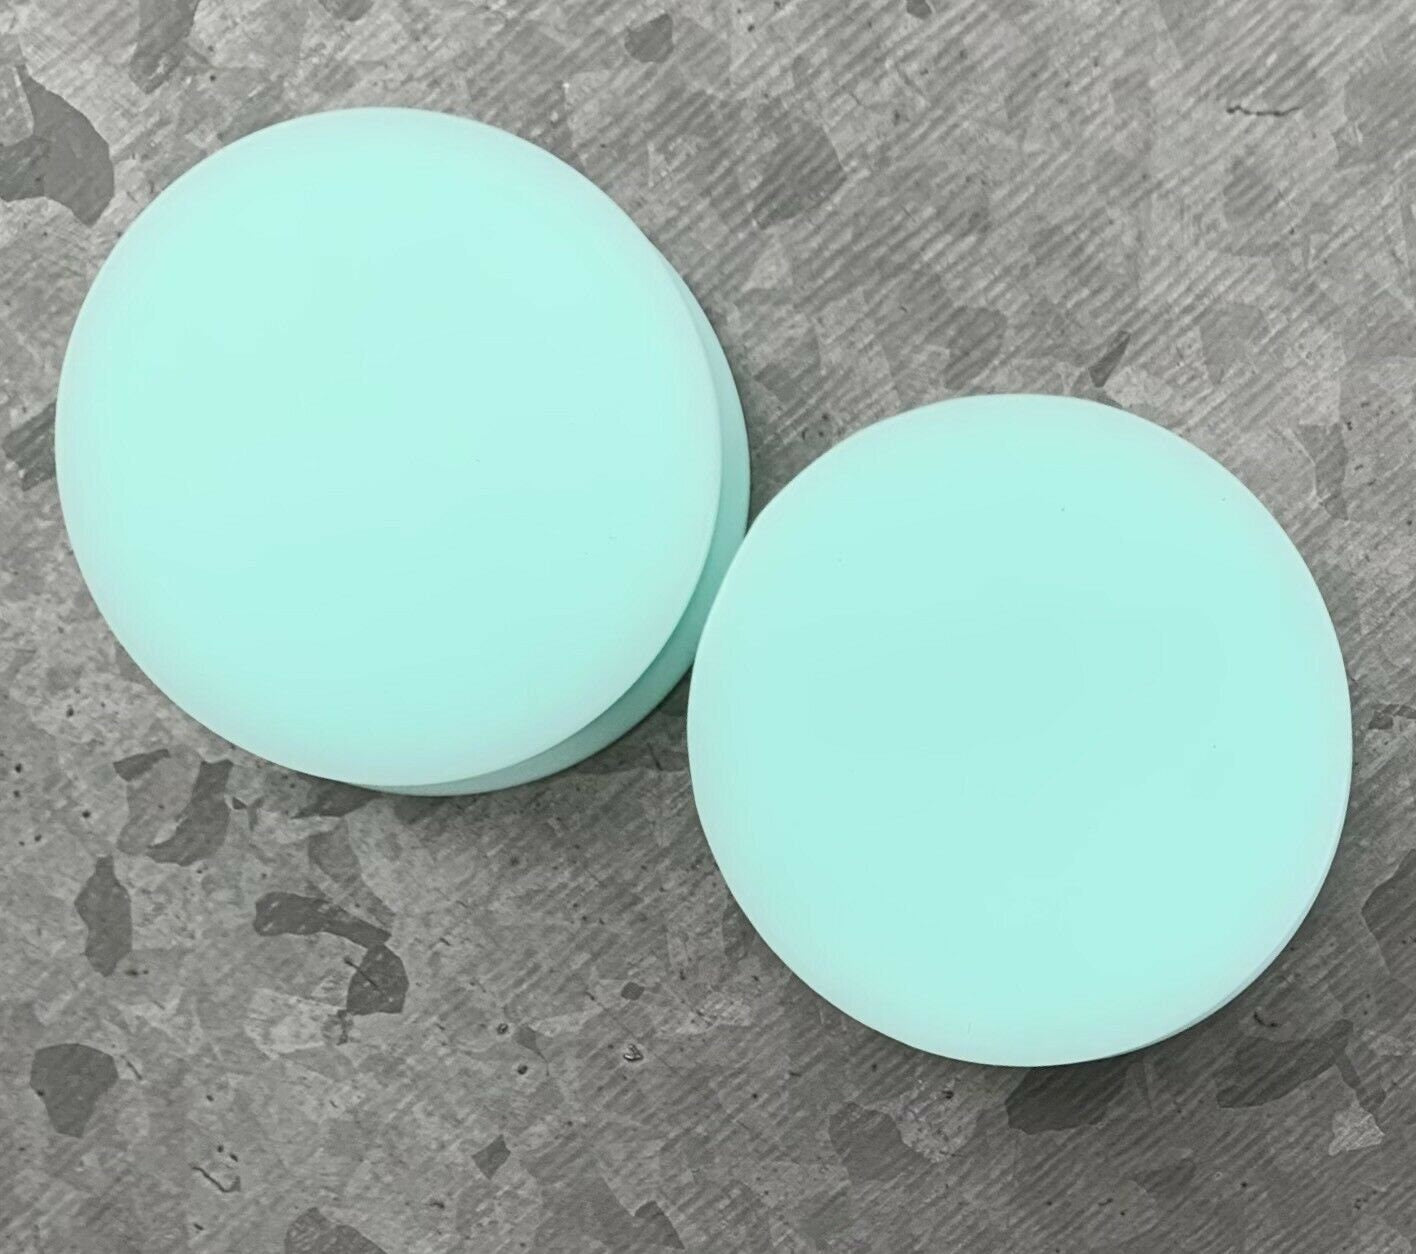 PAIR of Stunning Teal Solid Silicone Double Flare Plugs - Gauges 2g (6mm) up to 2" (51mm) available!